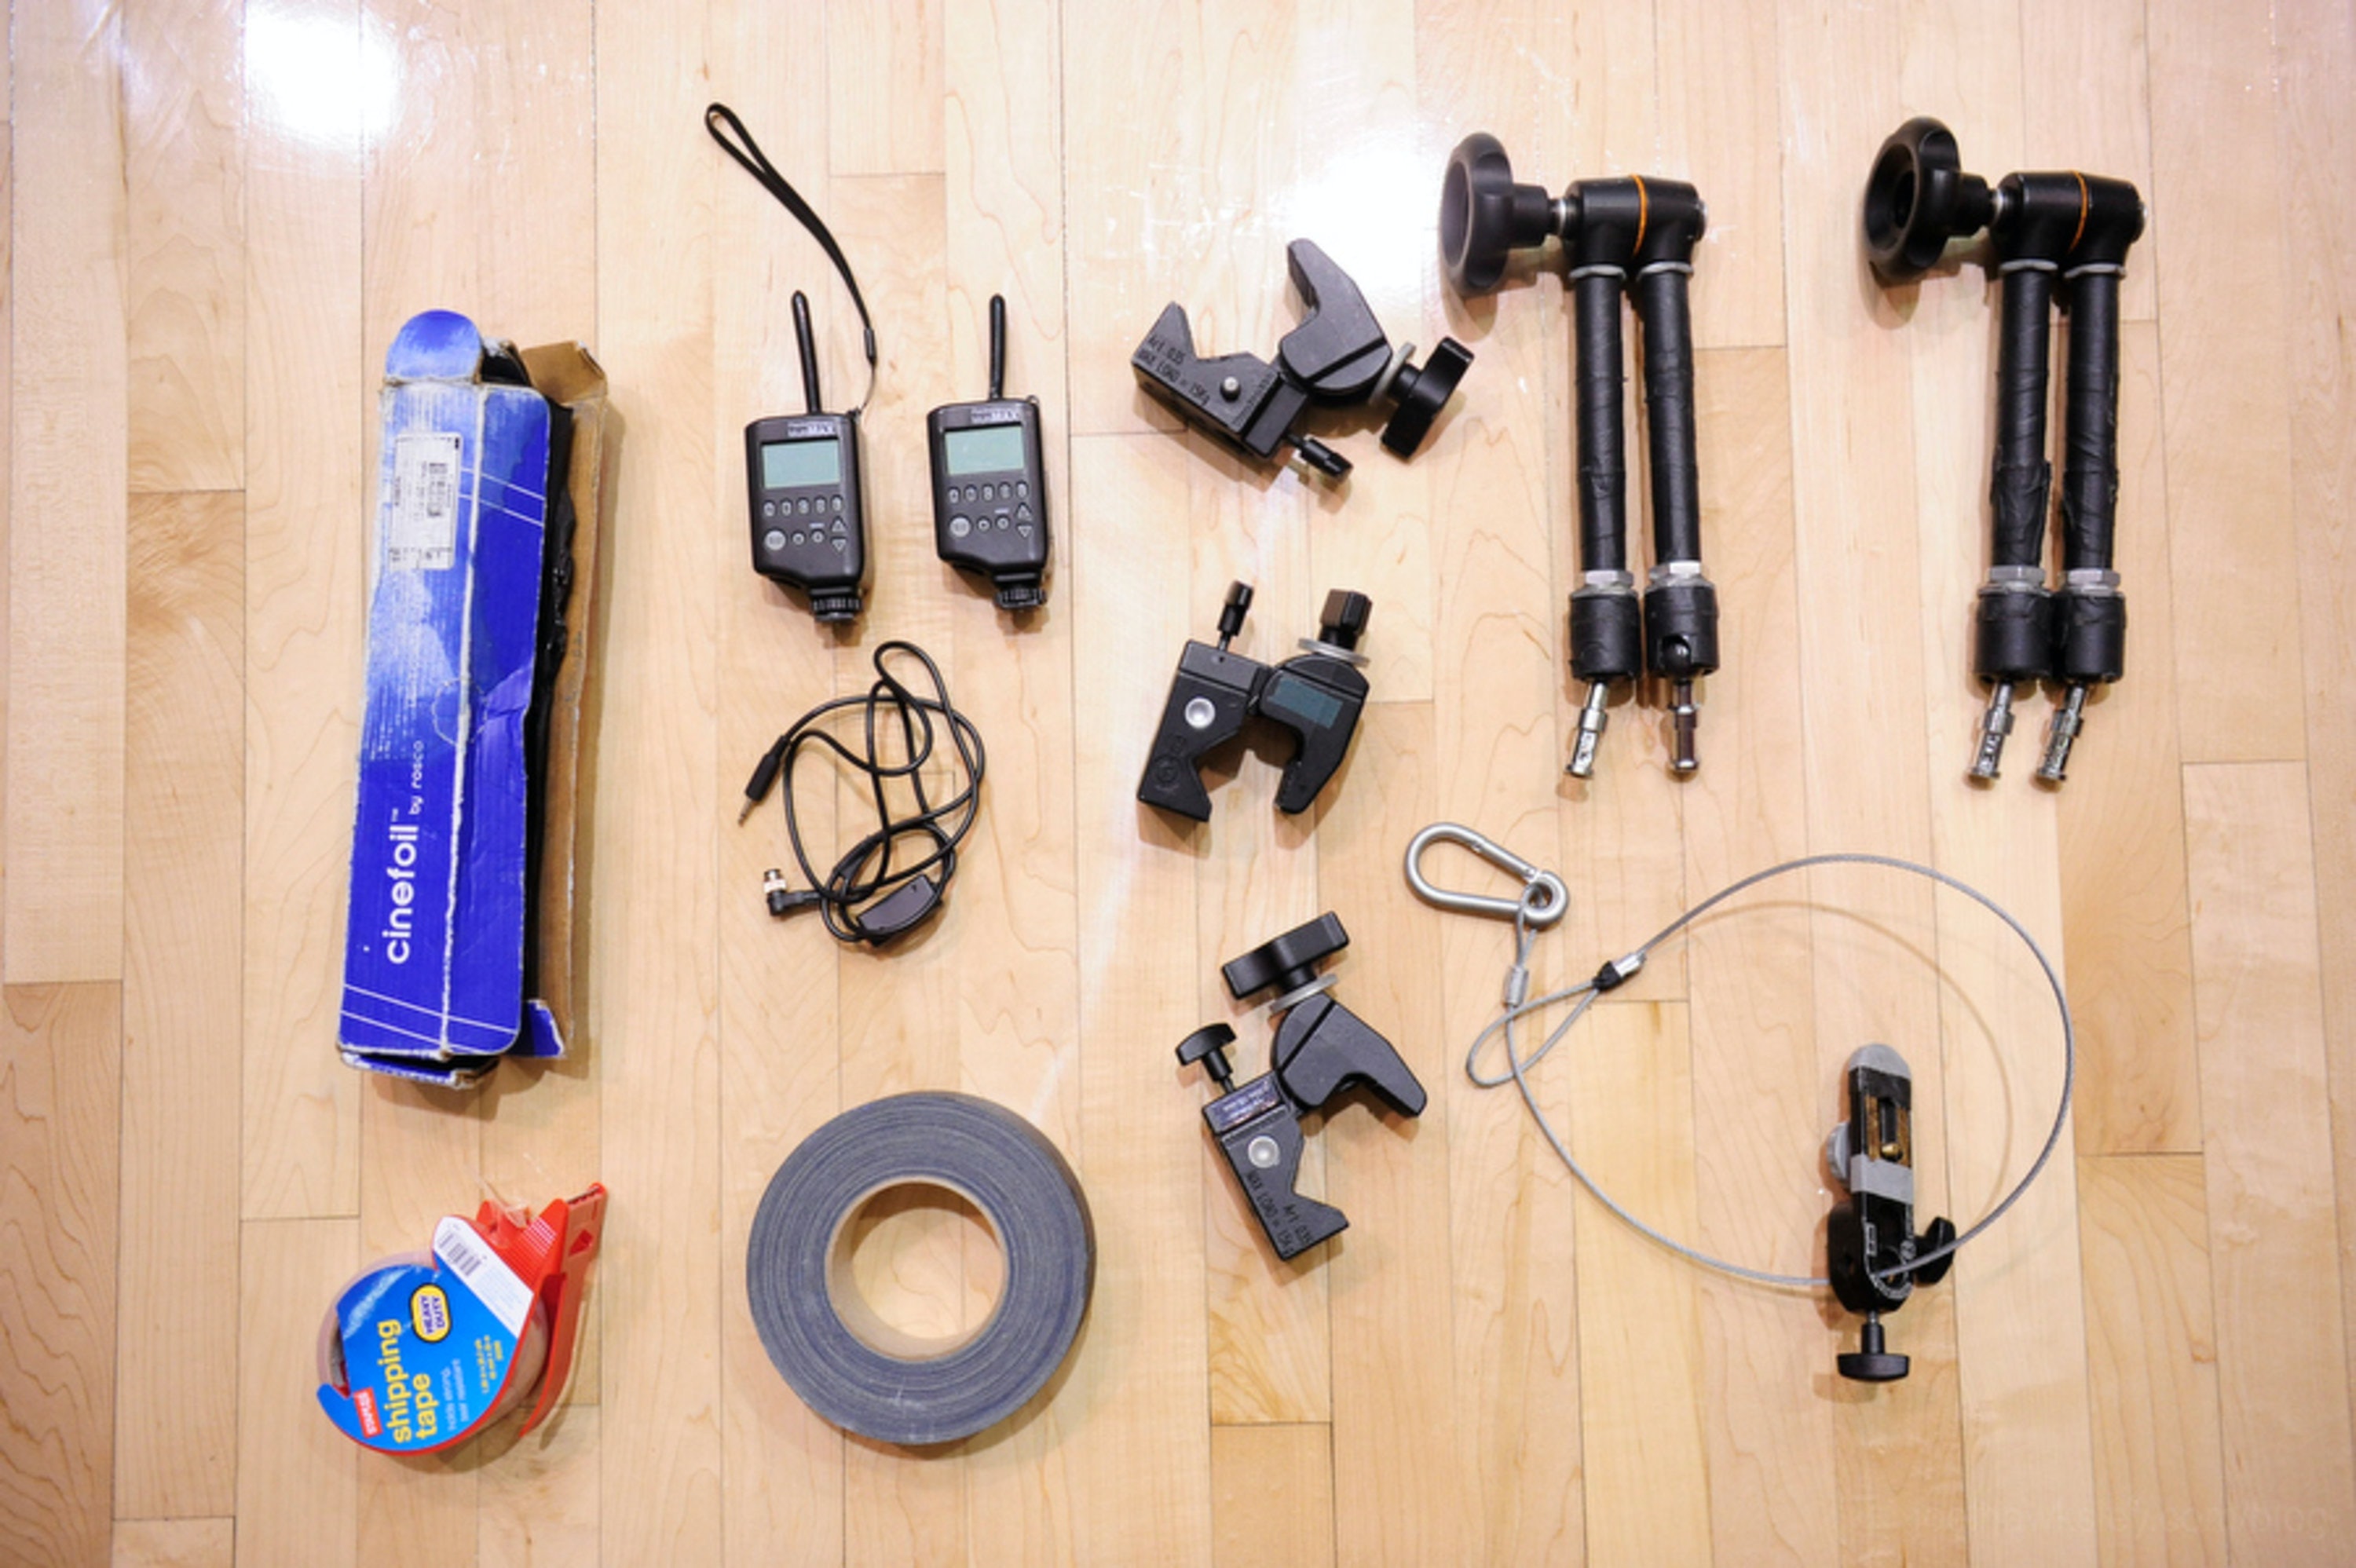 Mounting gear, radio triggers, and tape needed to rig a backboard remote camera